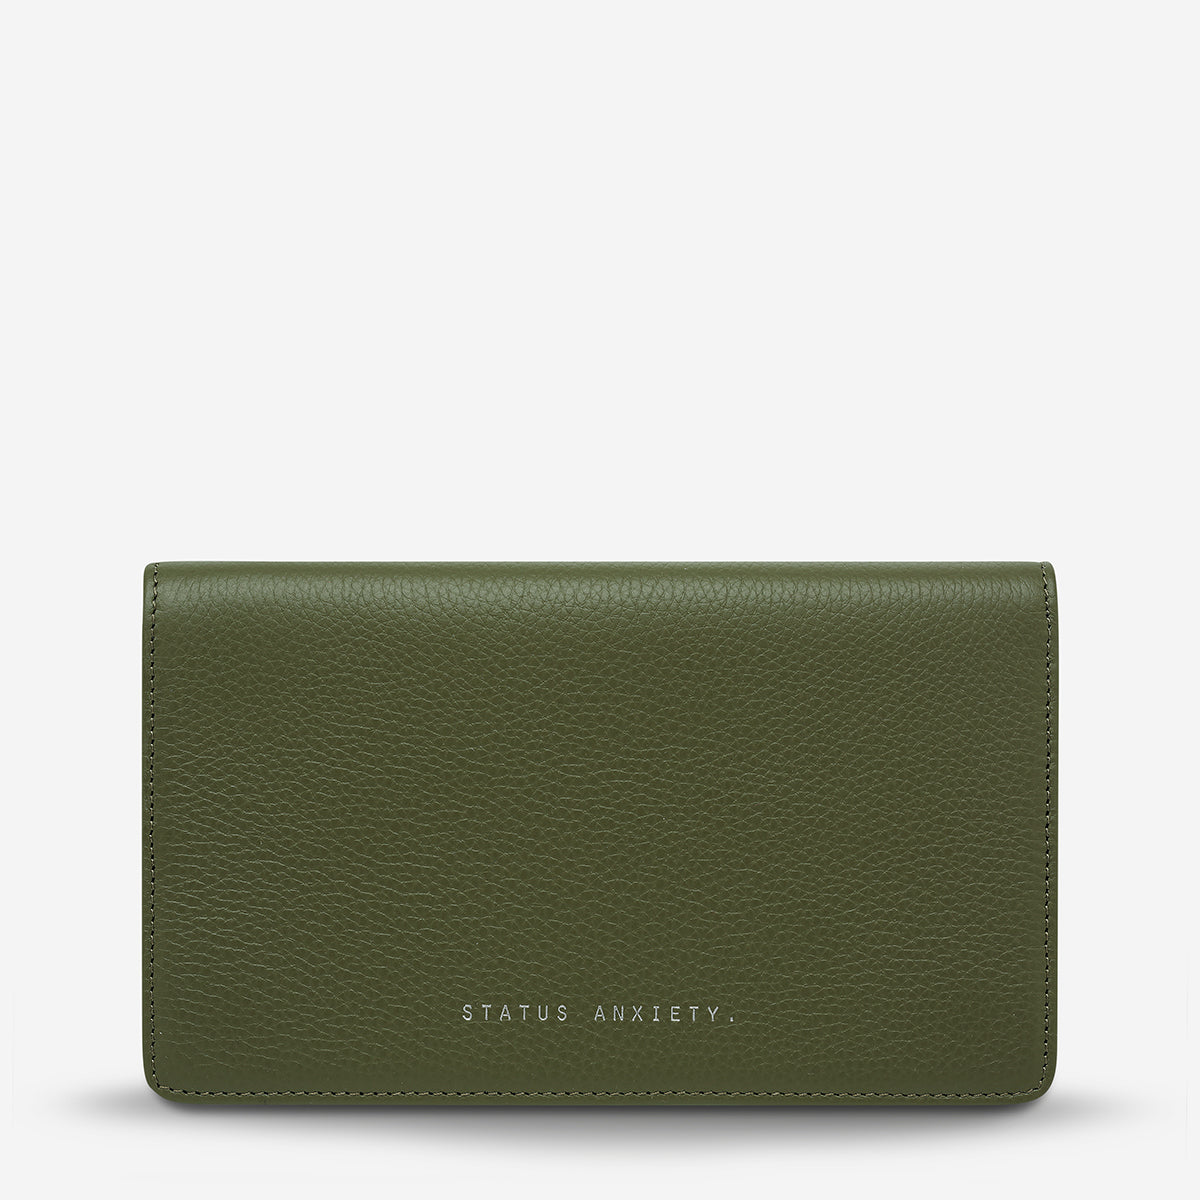 Status Anxiety Living Proof Women's Leather Wallet Khaki